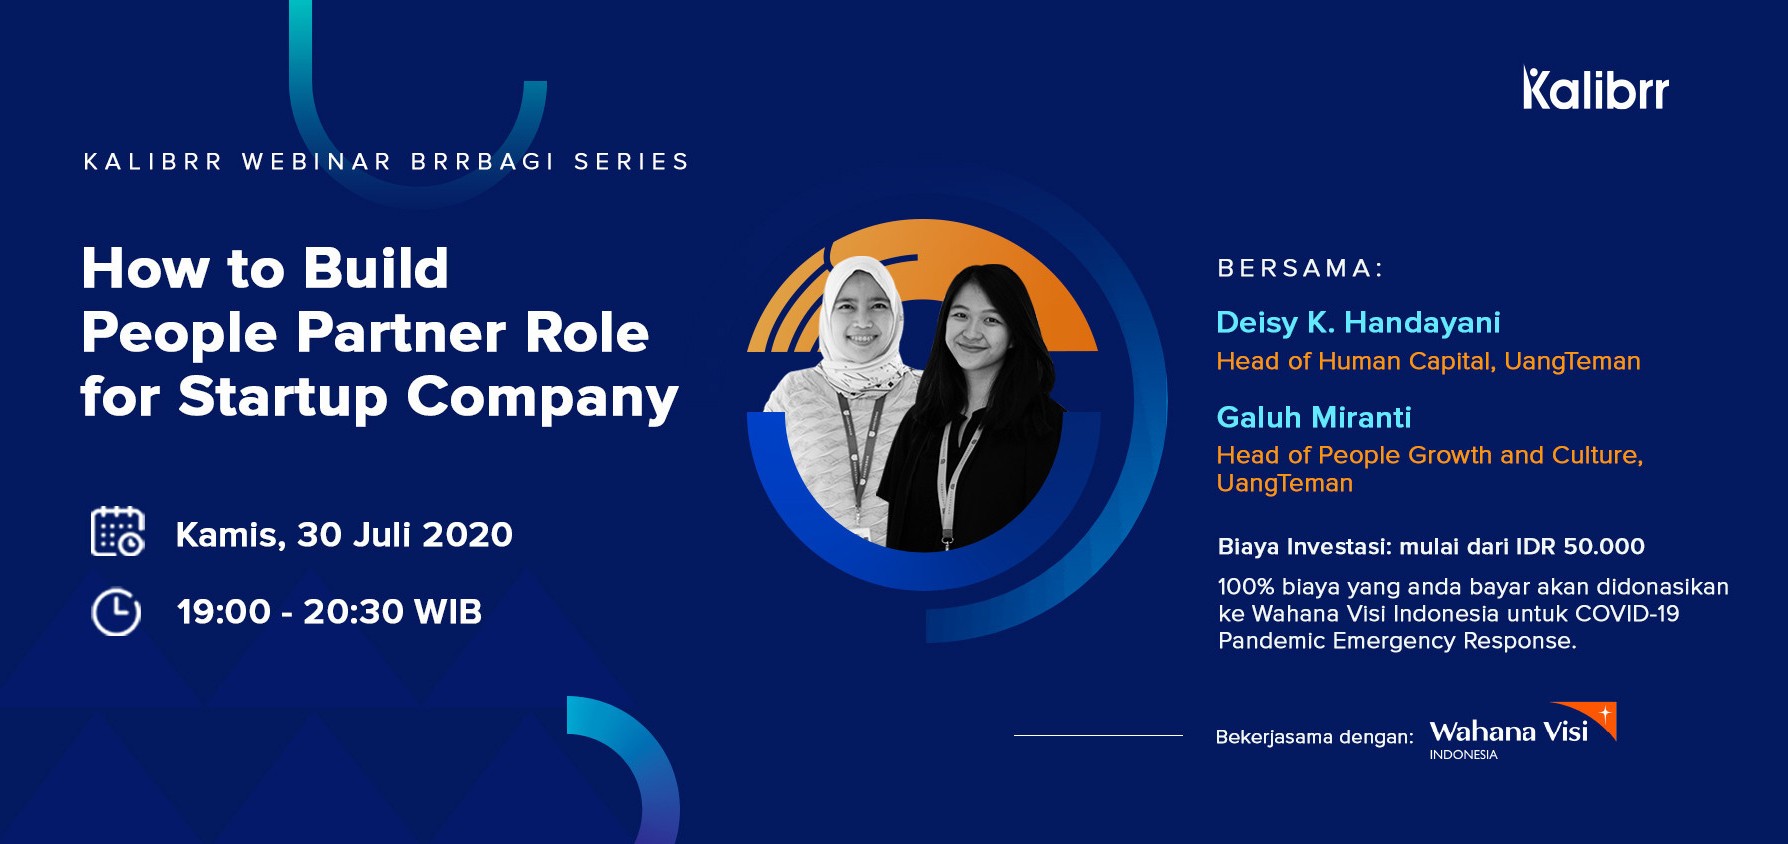 Kalibrr Webinar Brrbagi Series - How to Build People Partner Role for Startup Company